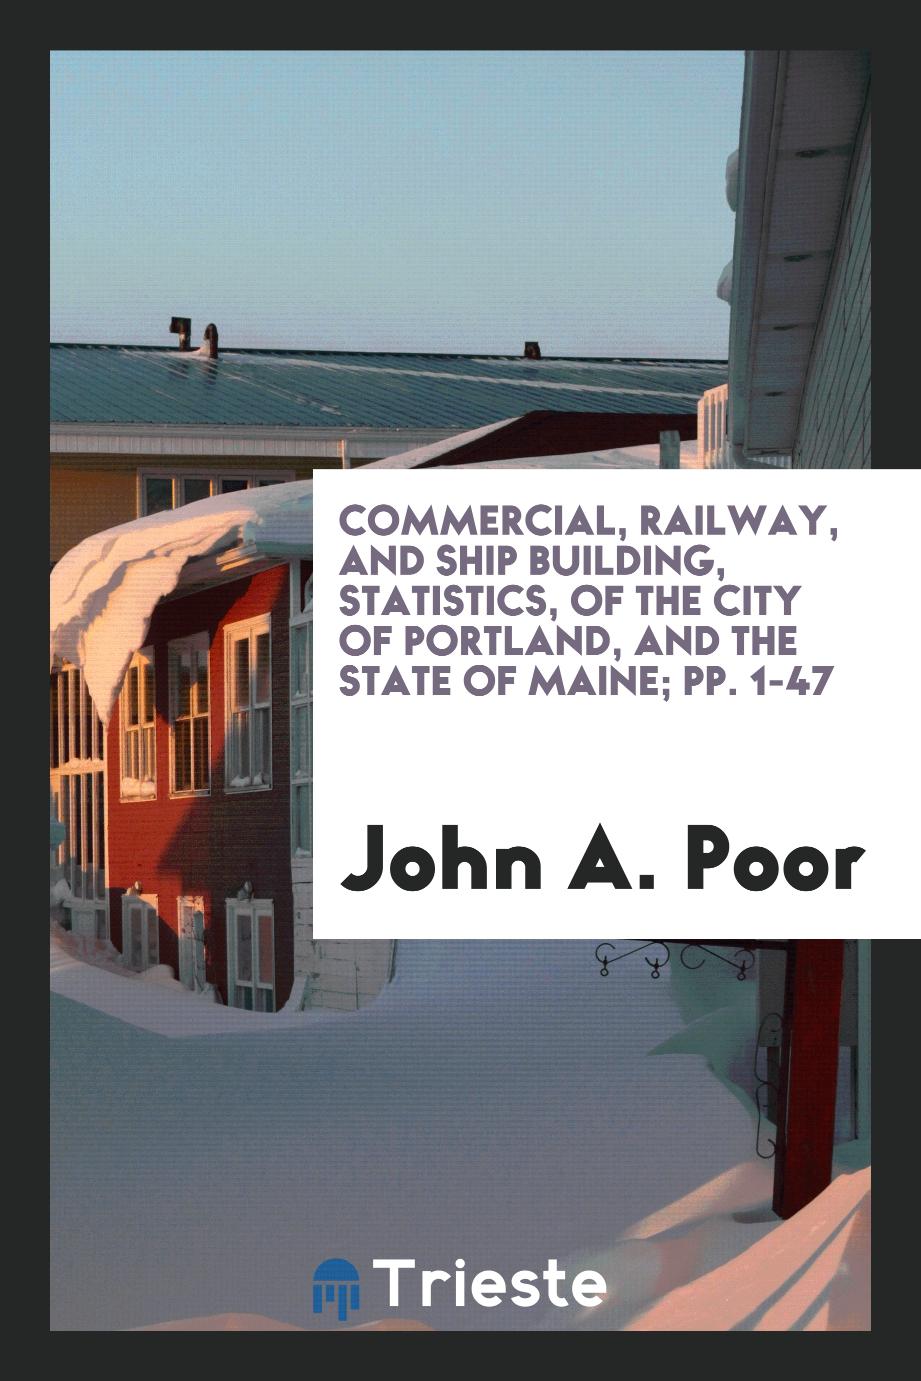 Commercial, Railway, and Ship Building, Statistics, of the City of Portland, and the State of Maine; pp. 1-47